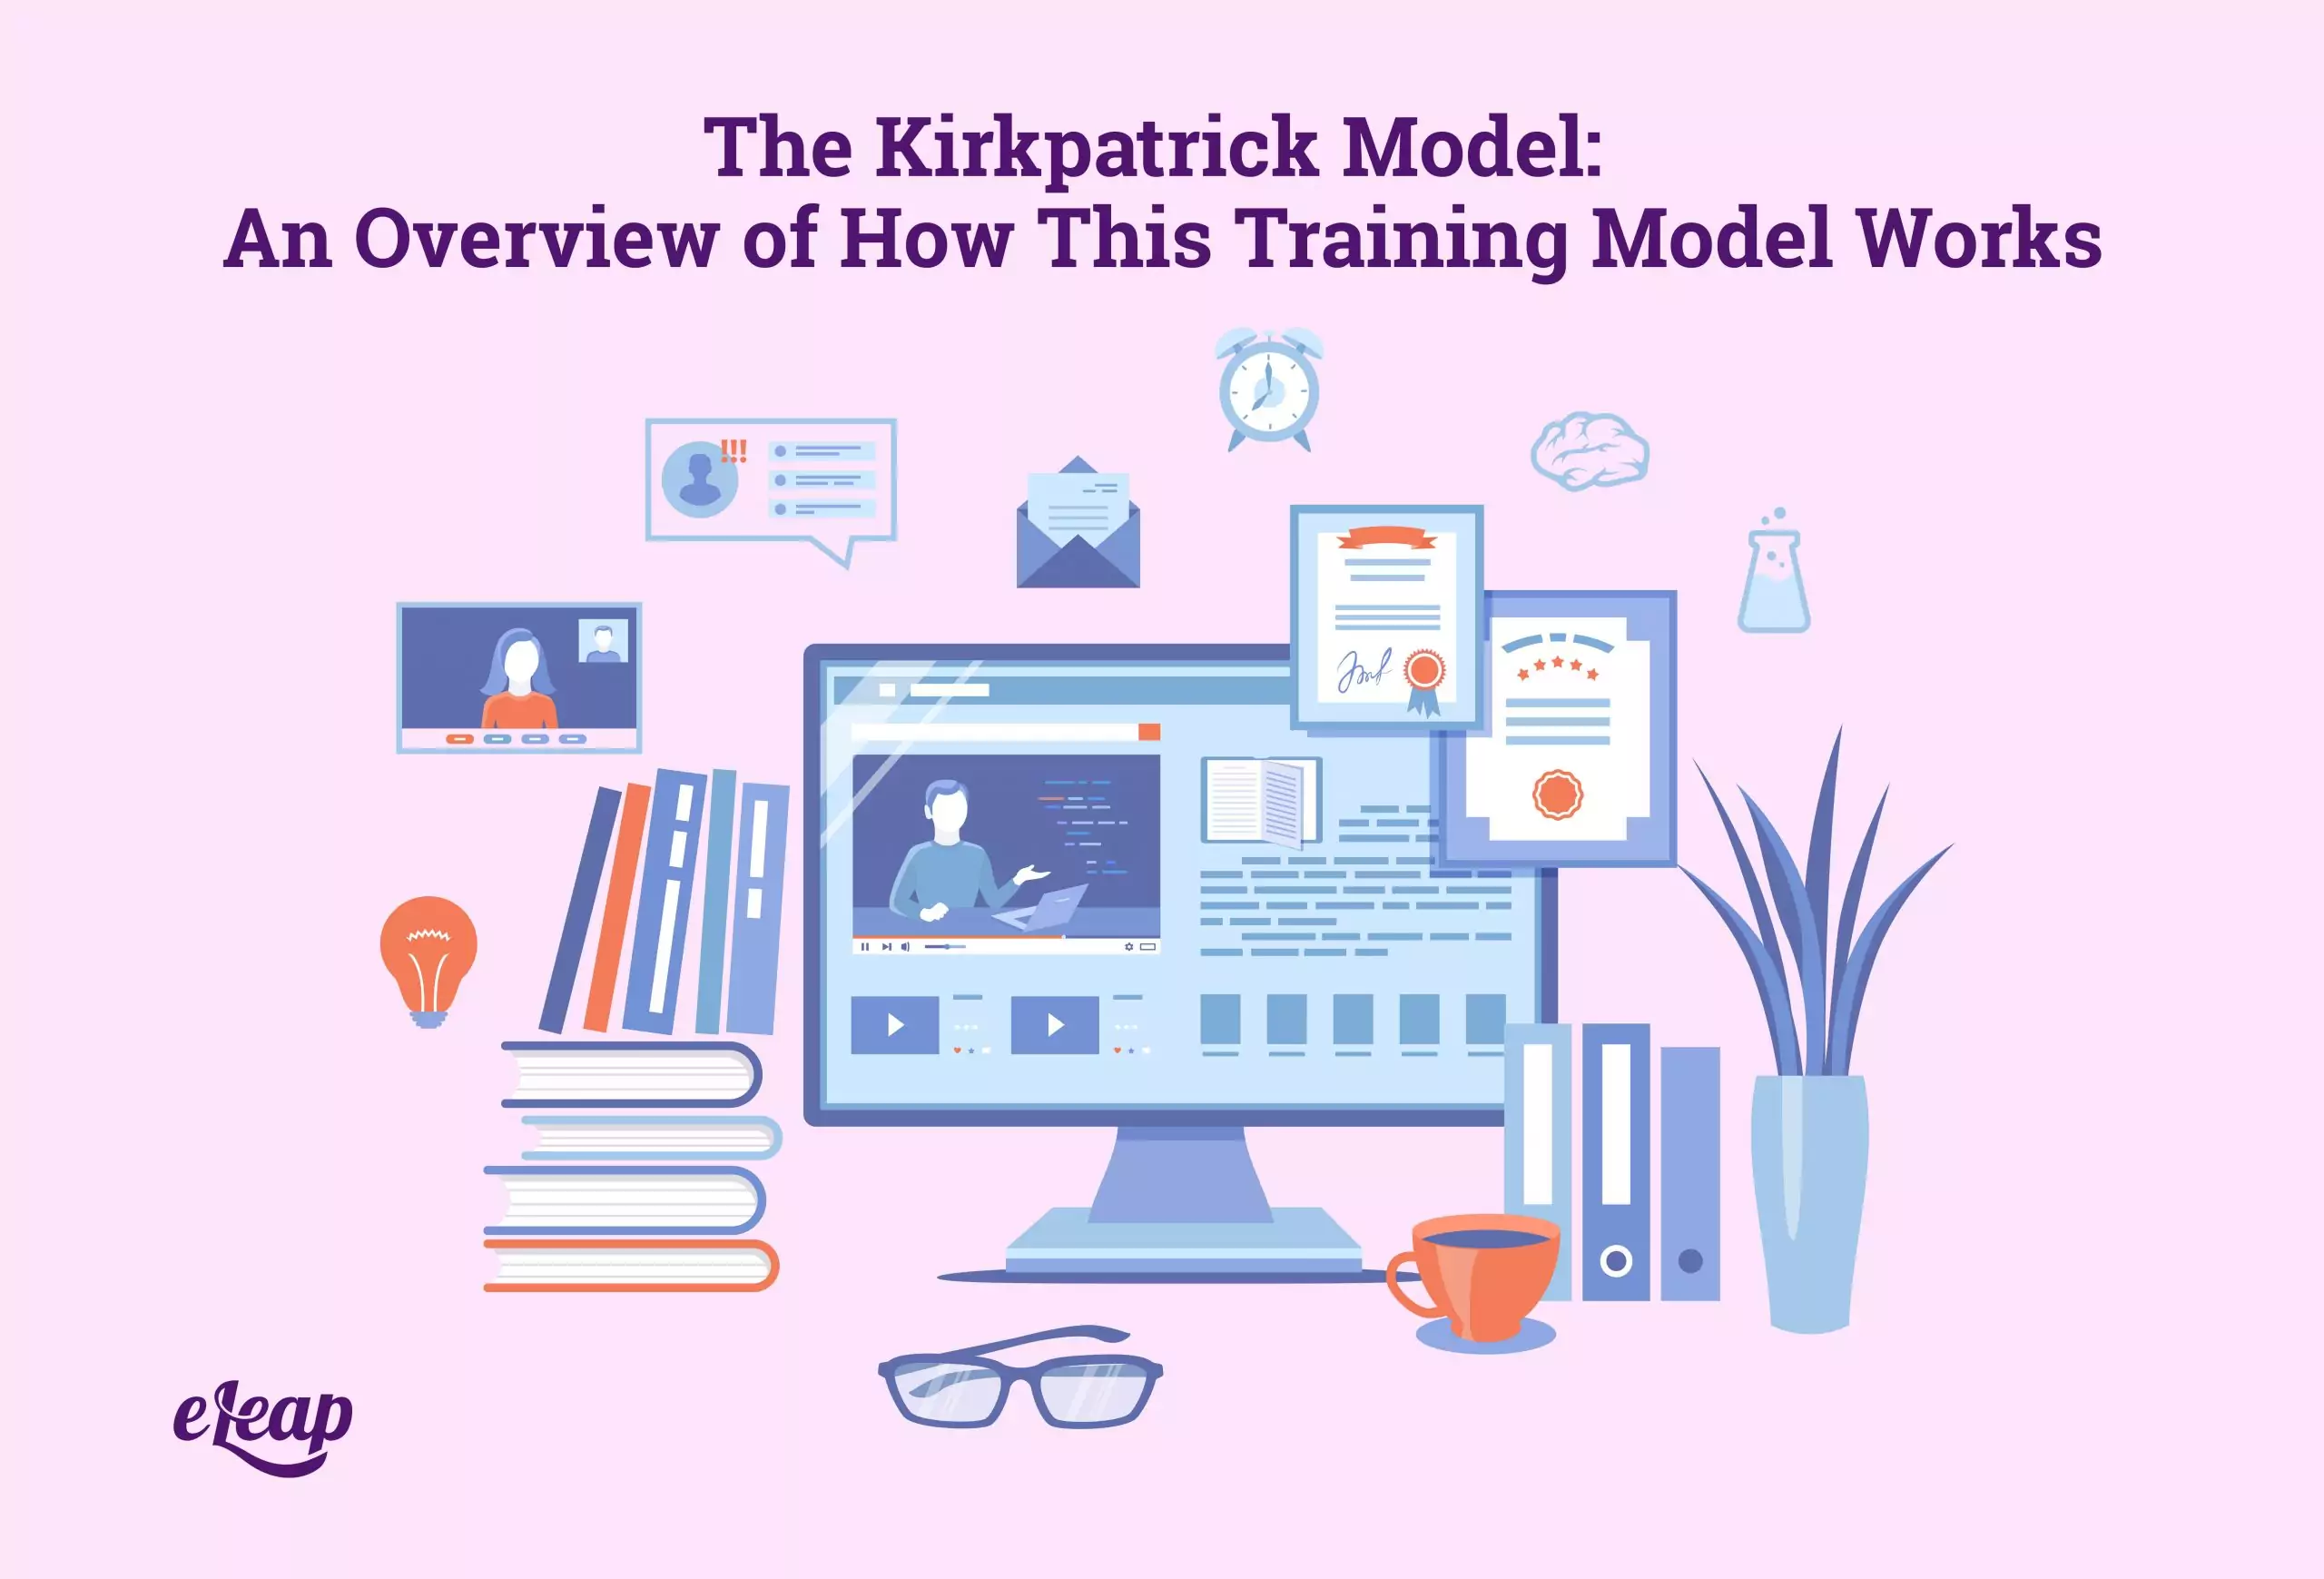 The Kirkpatrick Model: An Overview of this Training Model